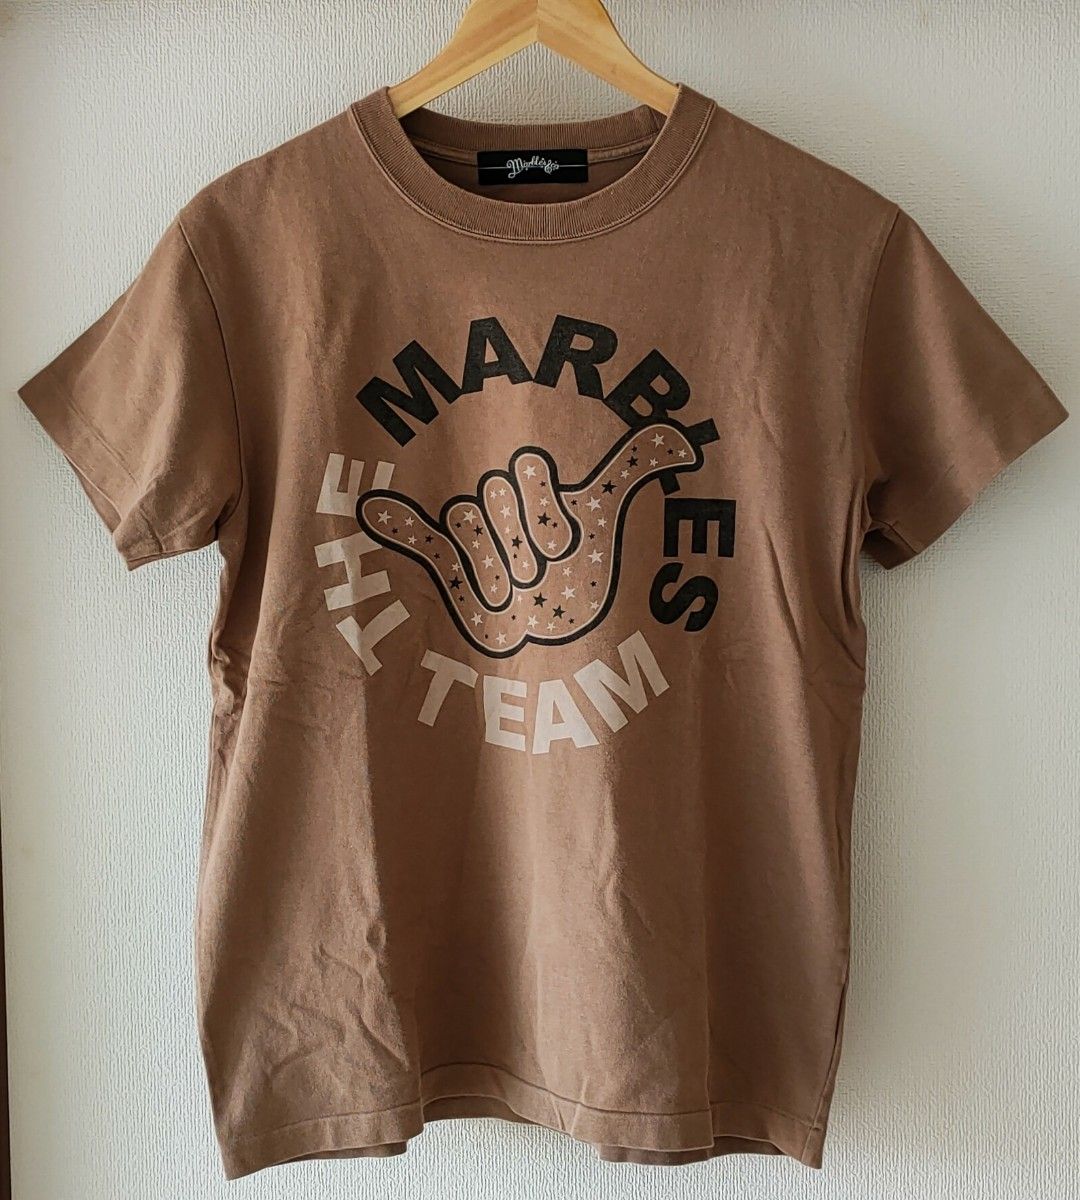 Marbles プリントTシャツ